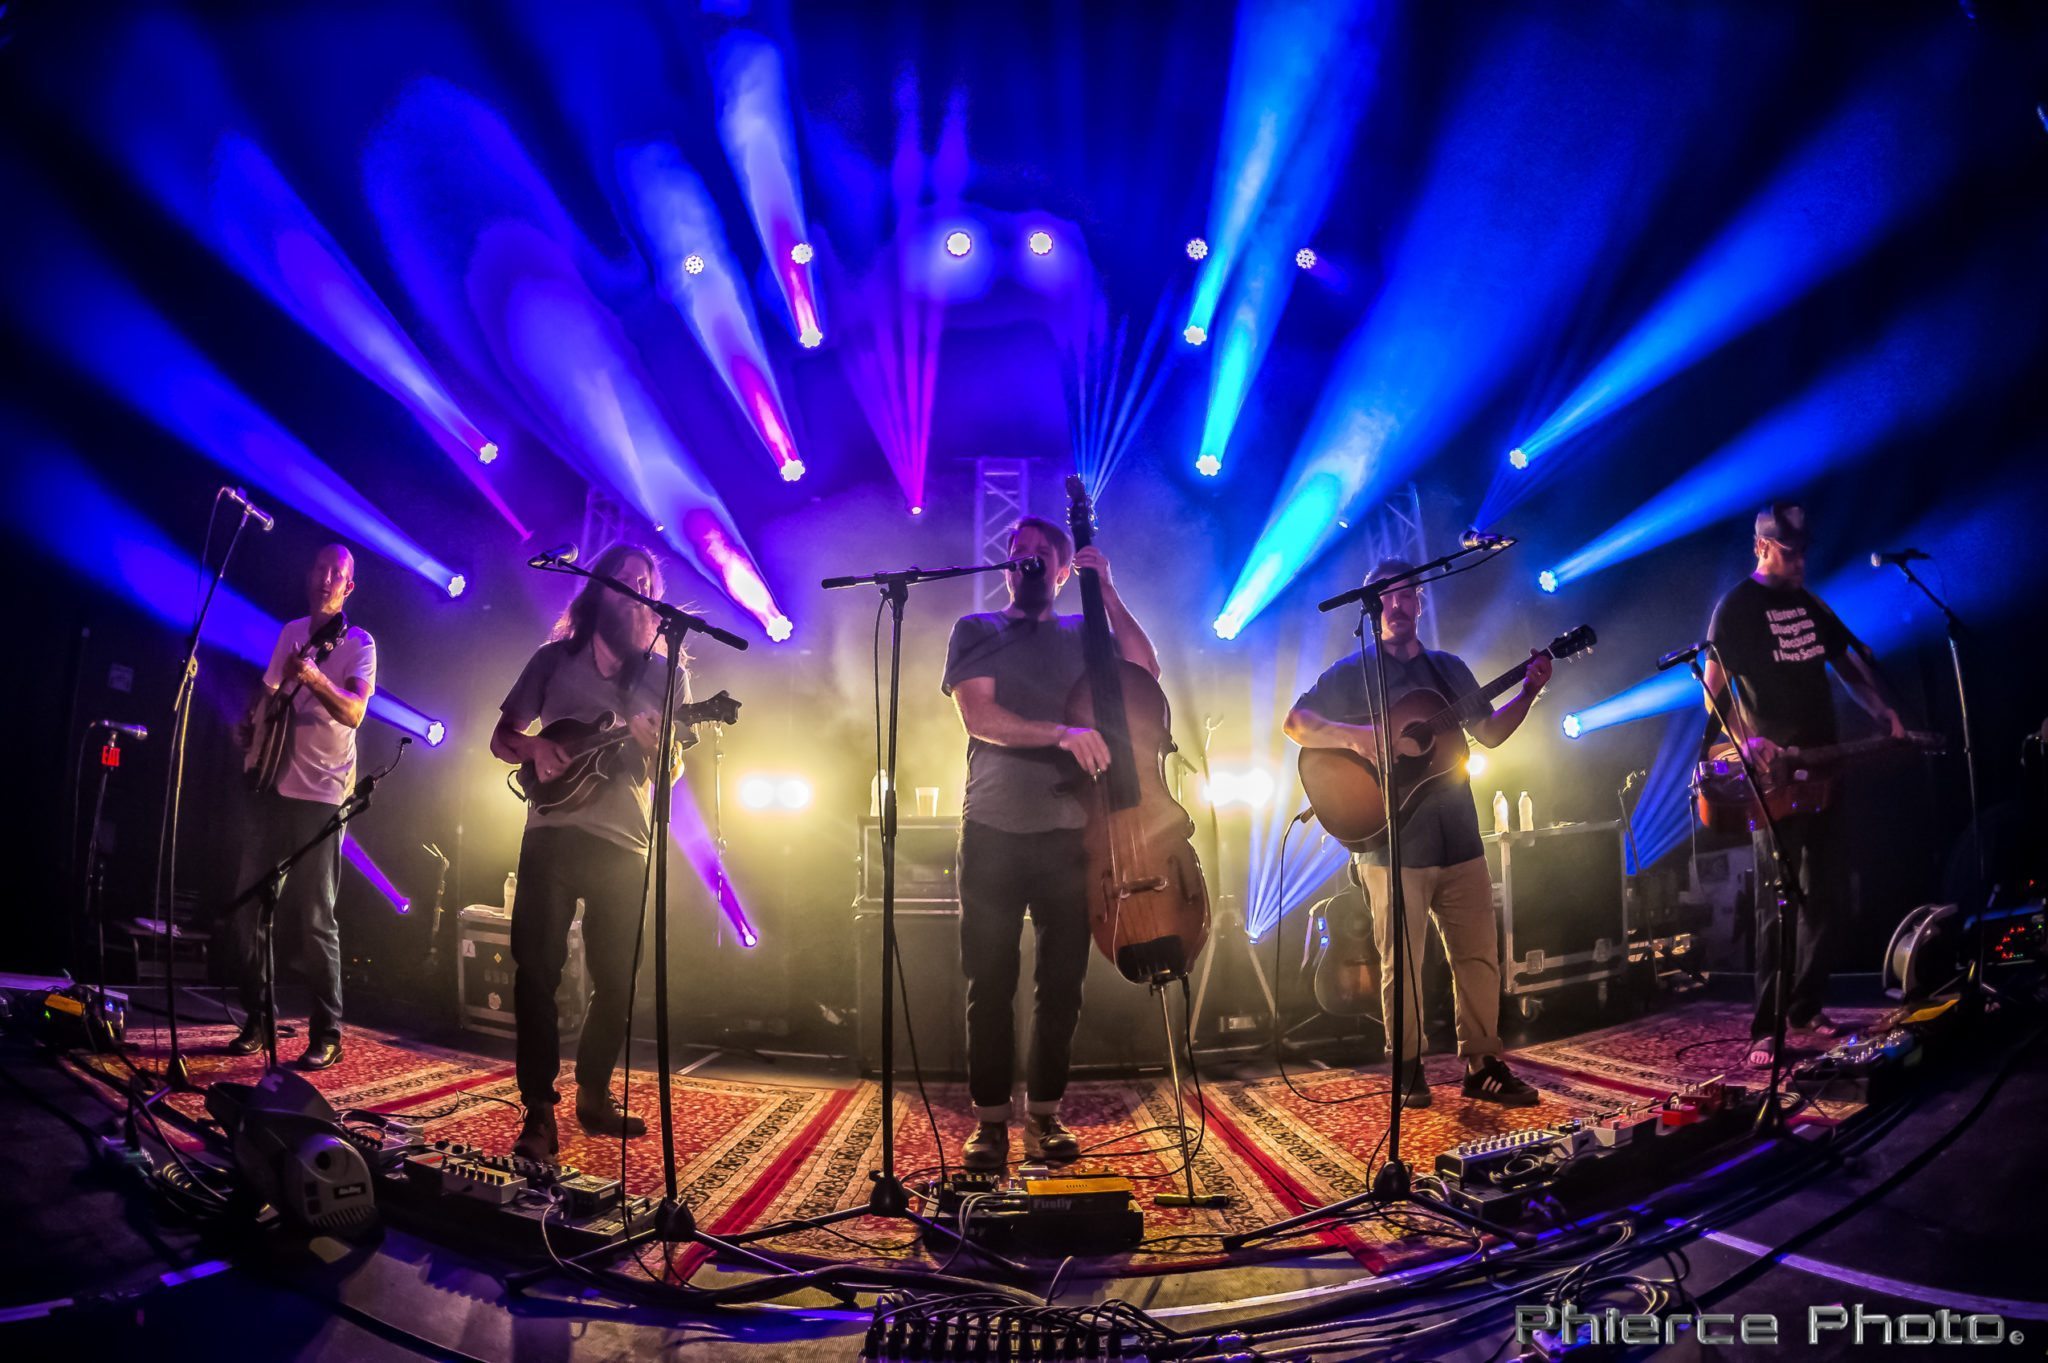 Greensky Bluegrass at Outdoor Stage At Salvage Station